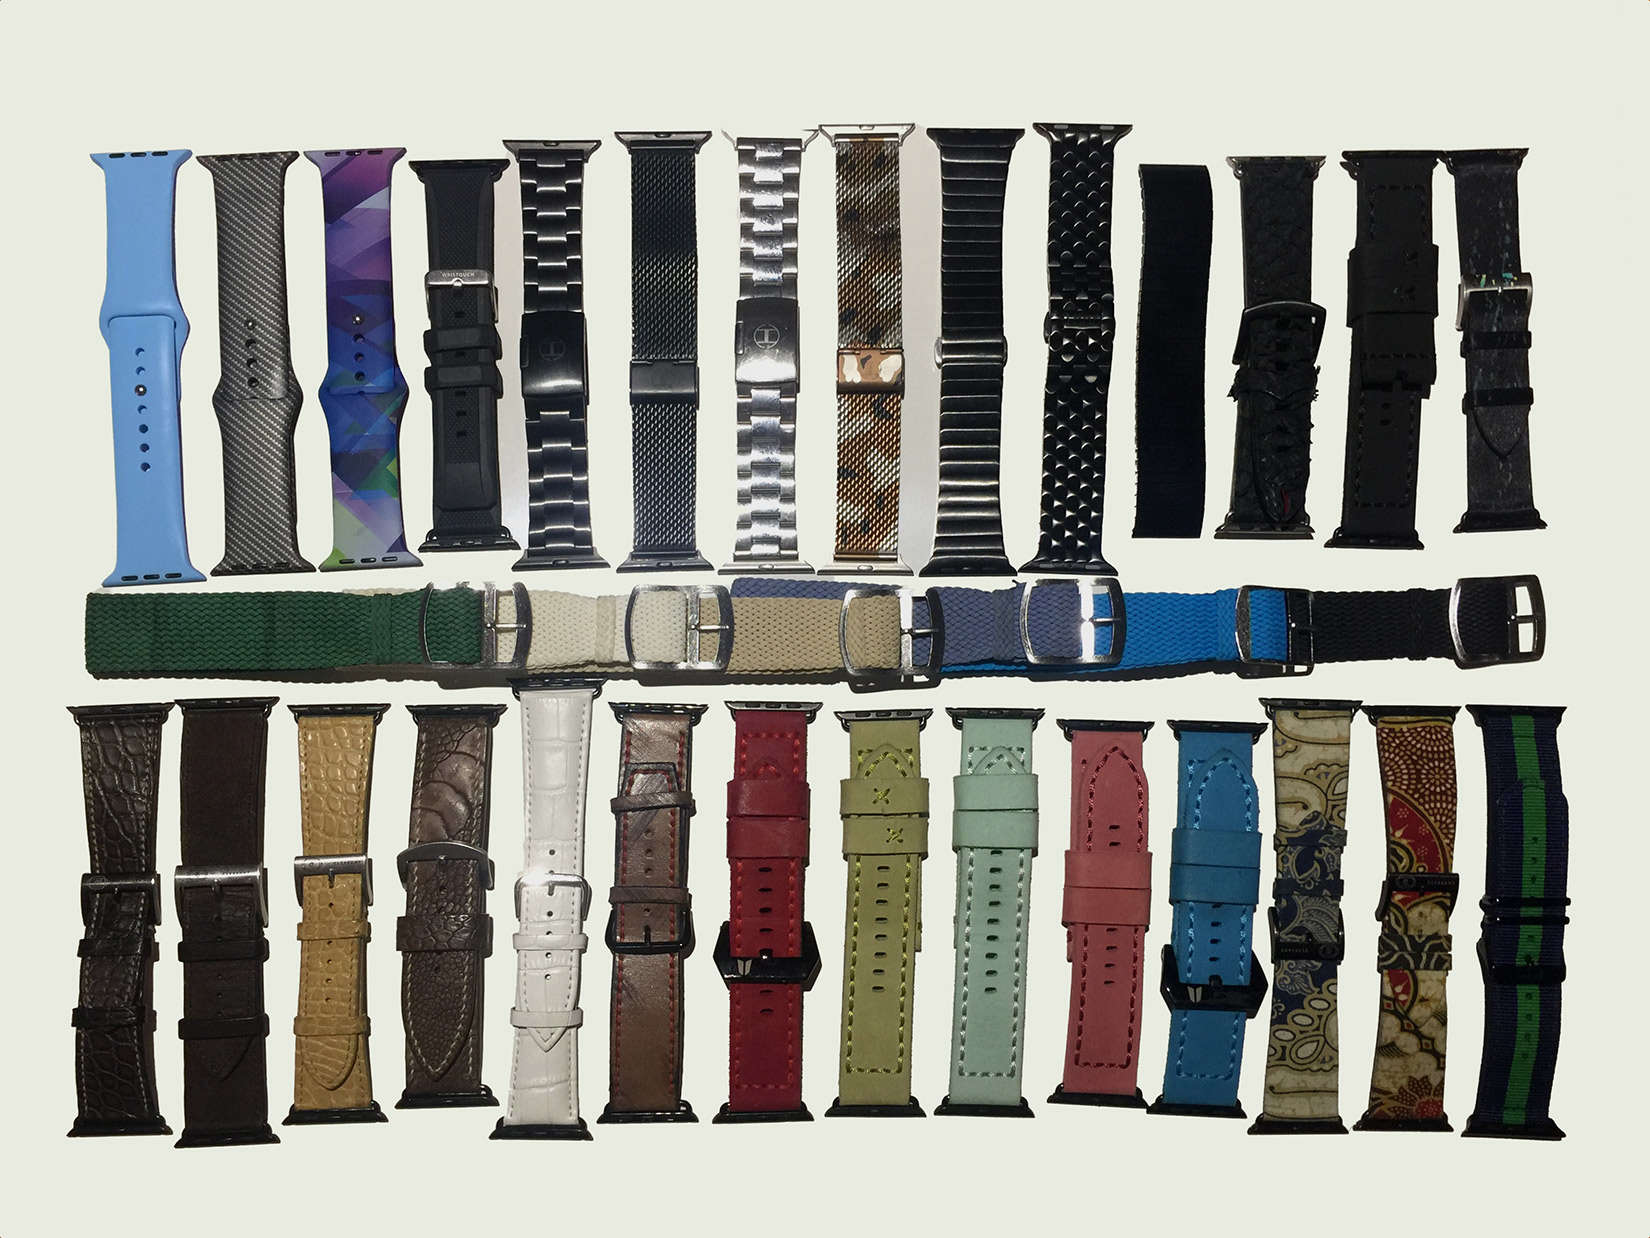 A sampling of Ryan Verbeek's ever-growing Apple Watch band collection.